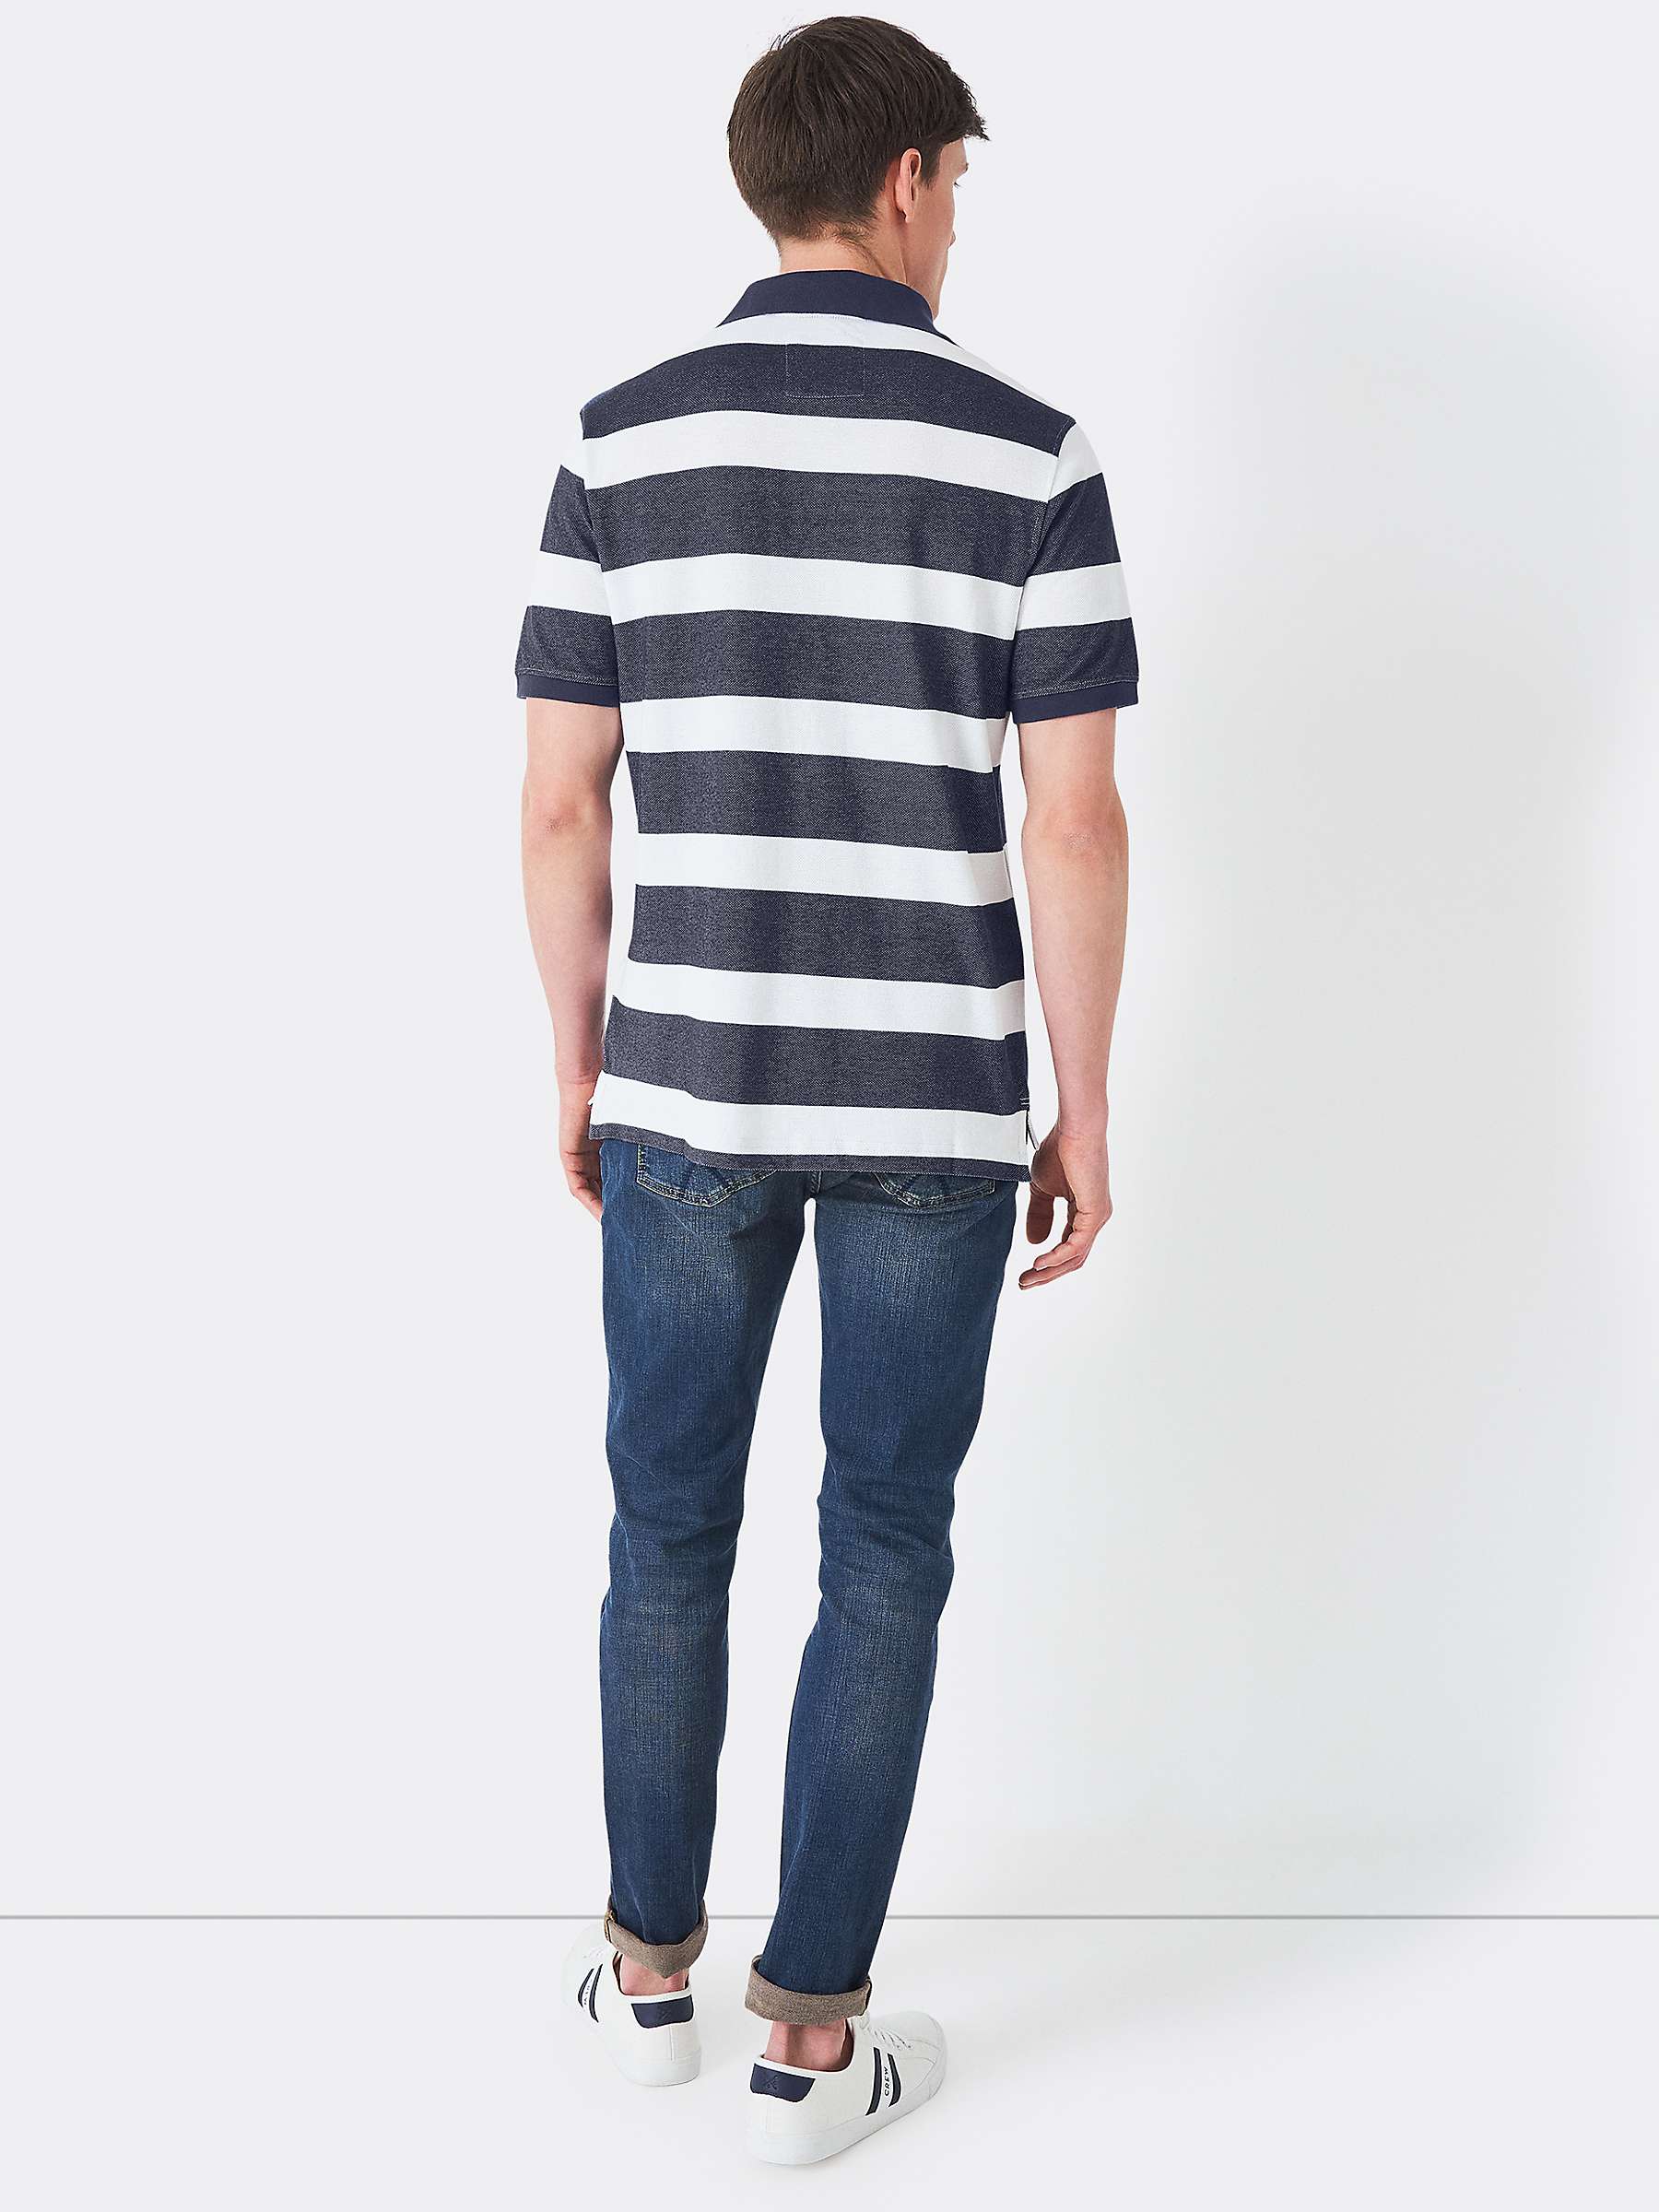 Buy Crew Clothing Stripe Polo Shirt Online at johnlewis.com